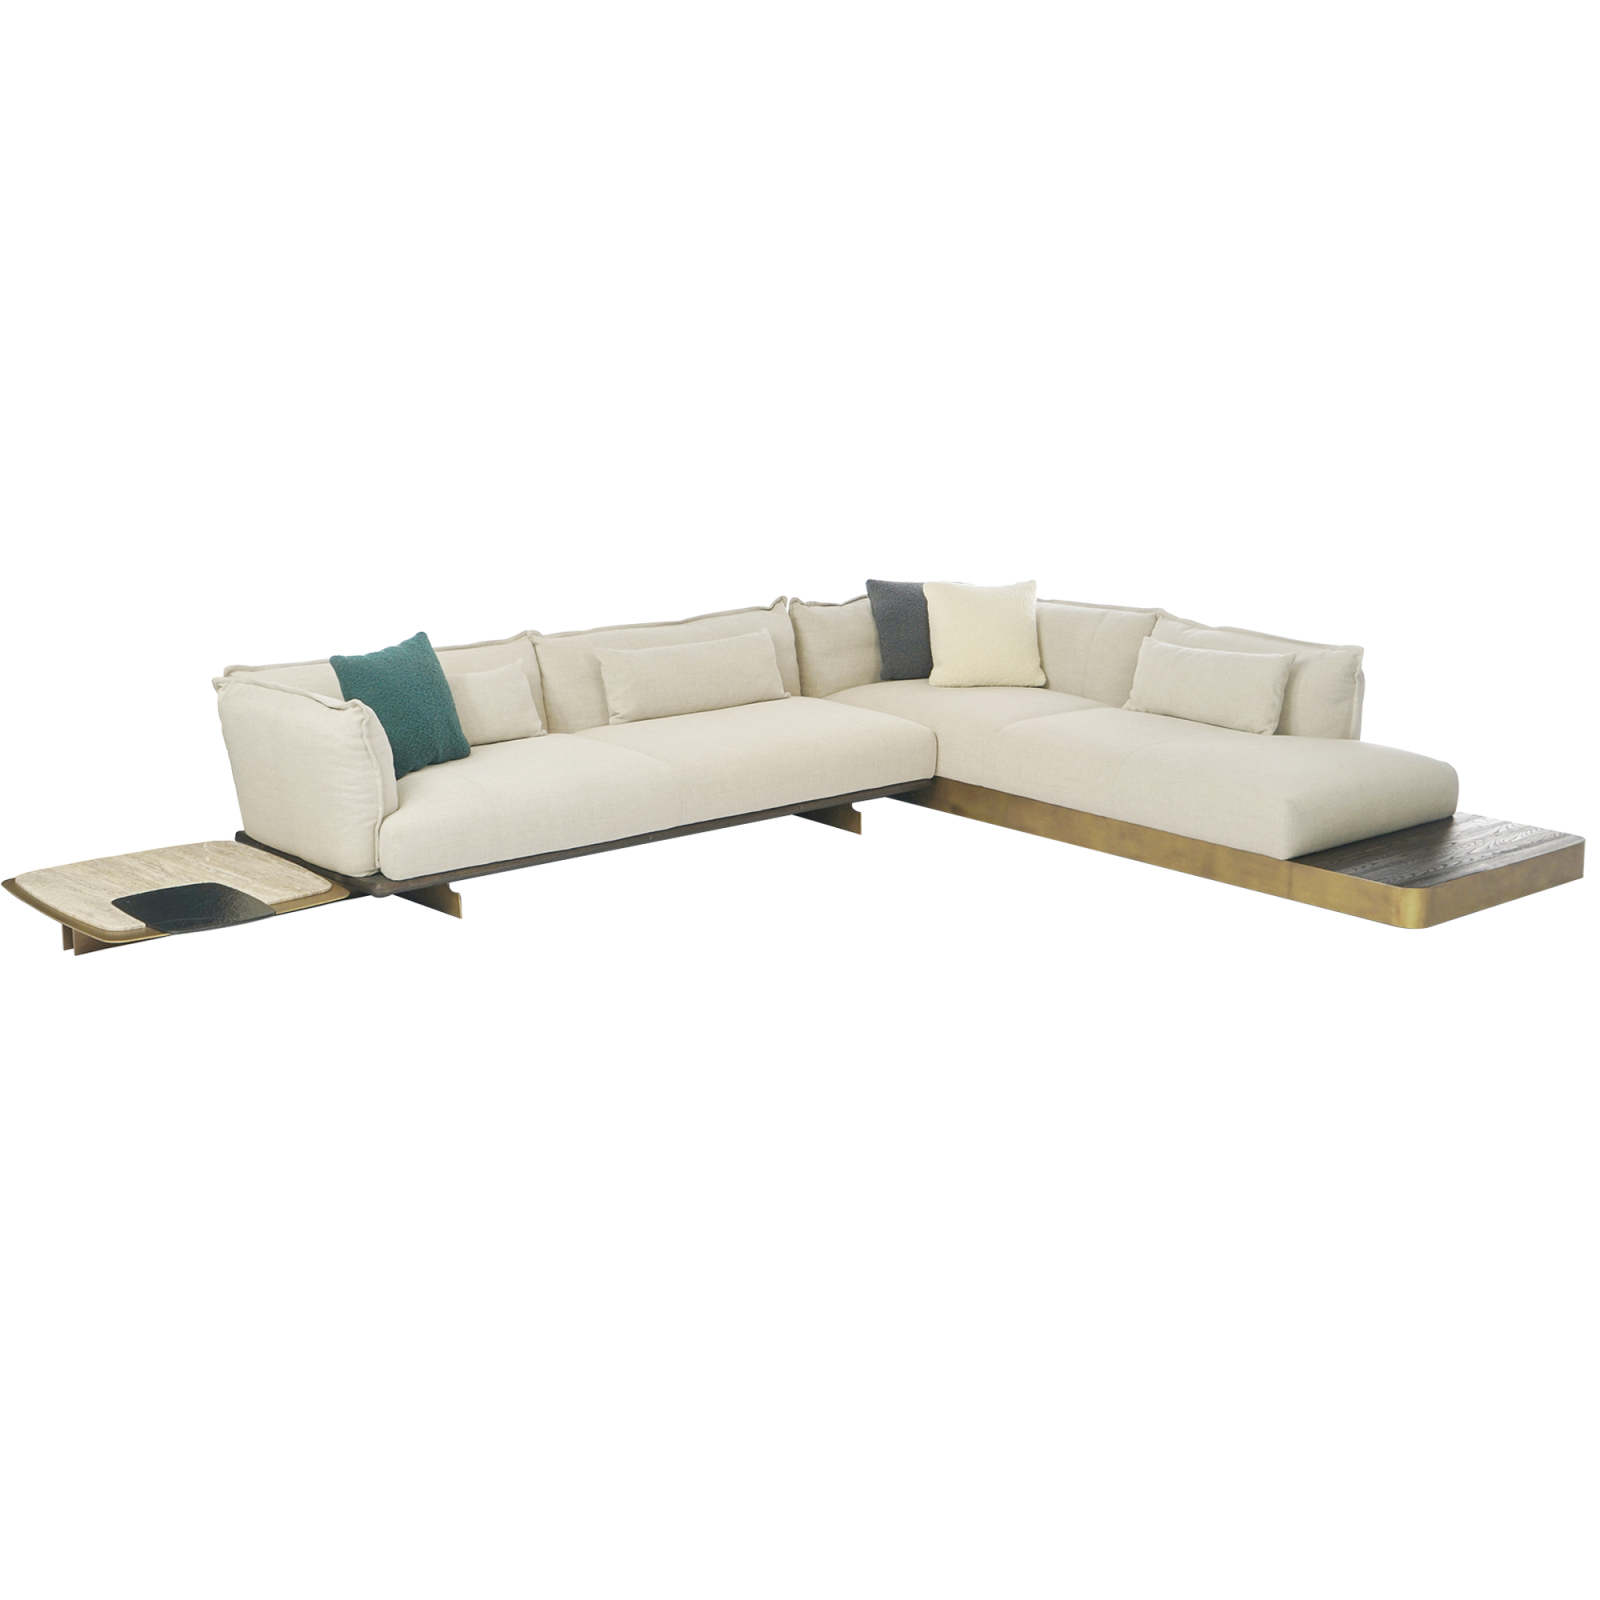 Stratos Sofa made of wood, metal, travertine, fusion glass and goose down